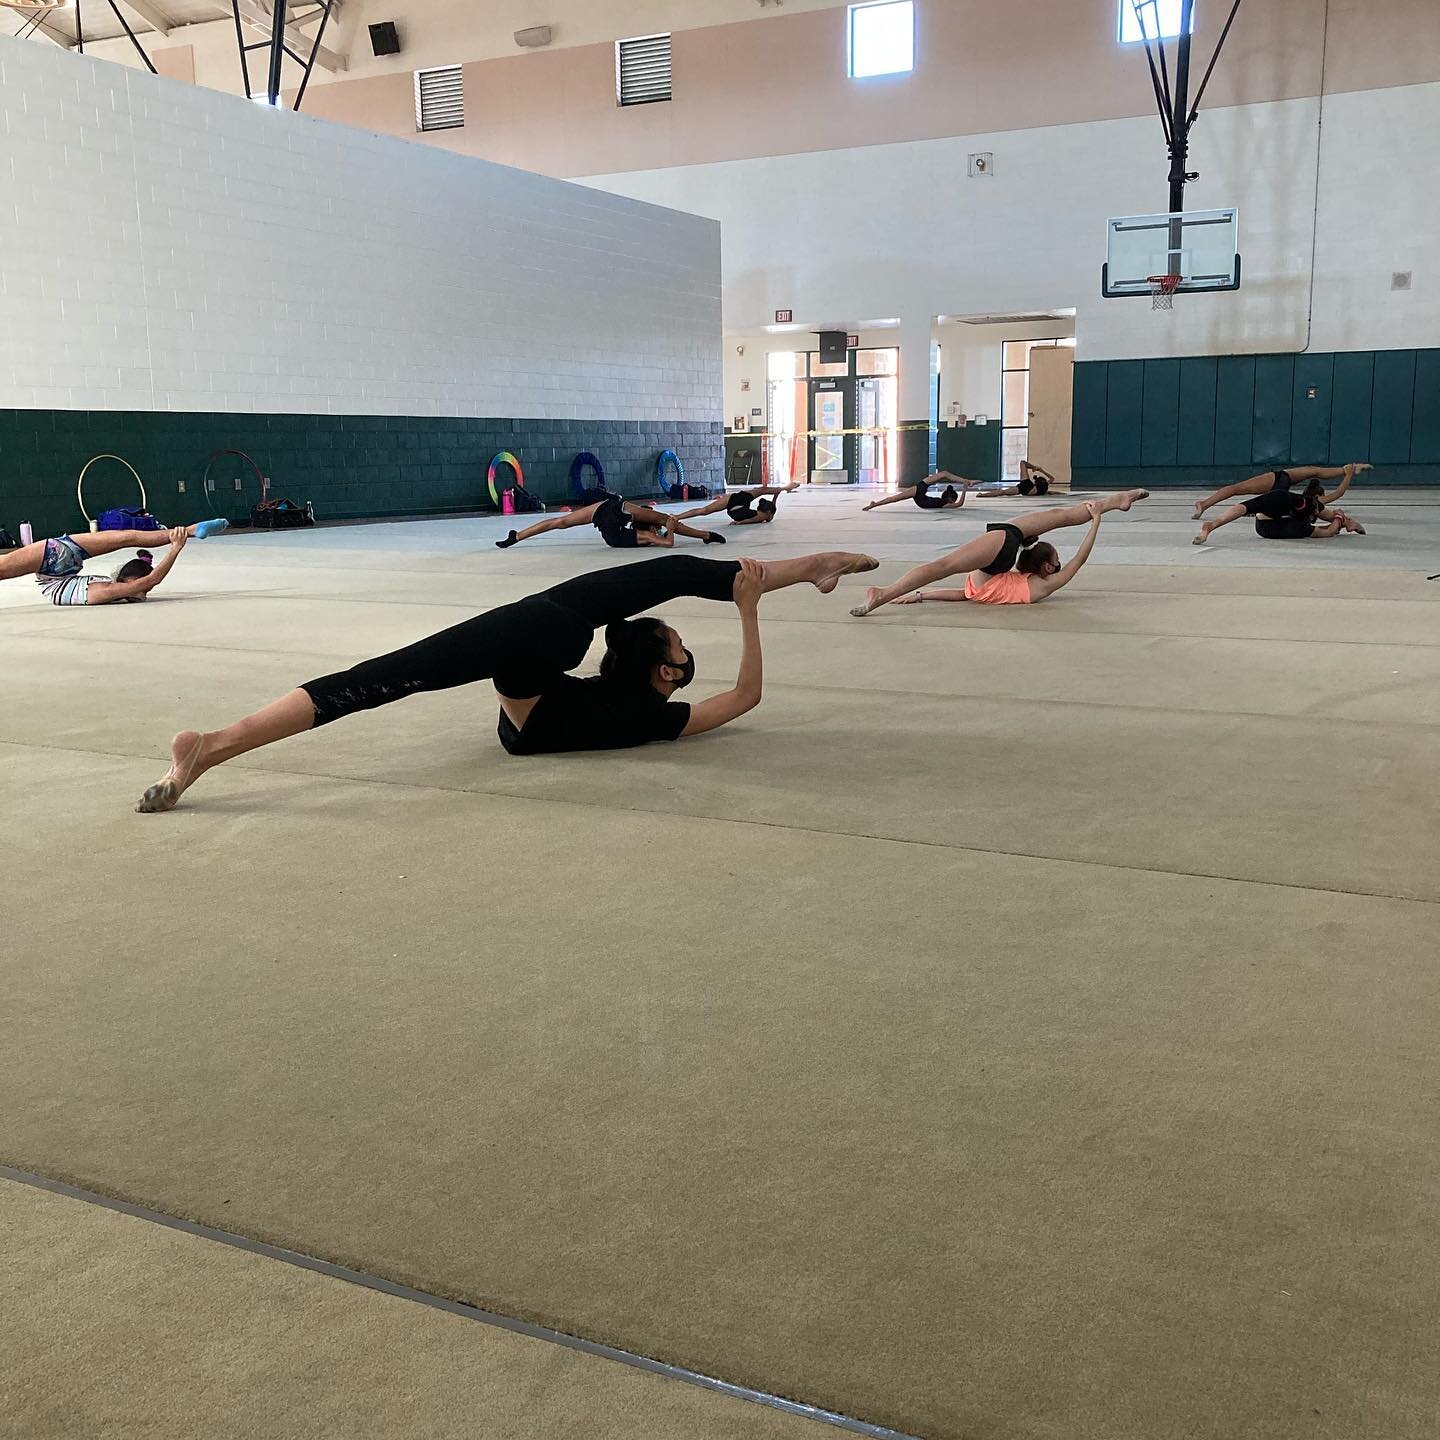 Keeping things very spread out in the gym. The health of our SDR family is the most important to us and that&rsquo;s why we take #socialdistancing so seriously 💪🏻💪🏻 #rhythmicgymnasticssandiego #rhythmicgymnastics #rhythmic #sandiego #sandiegorhyt